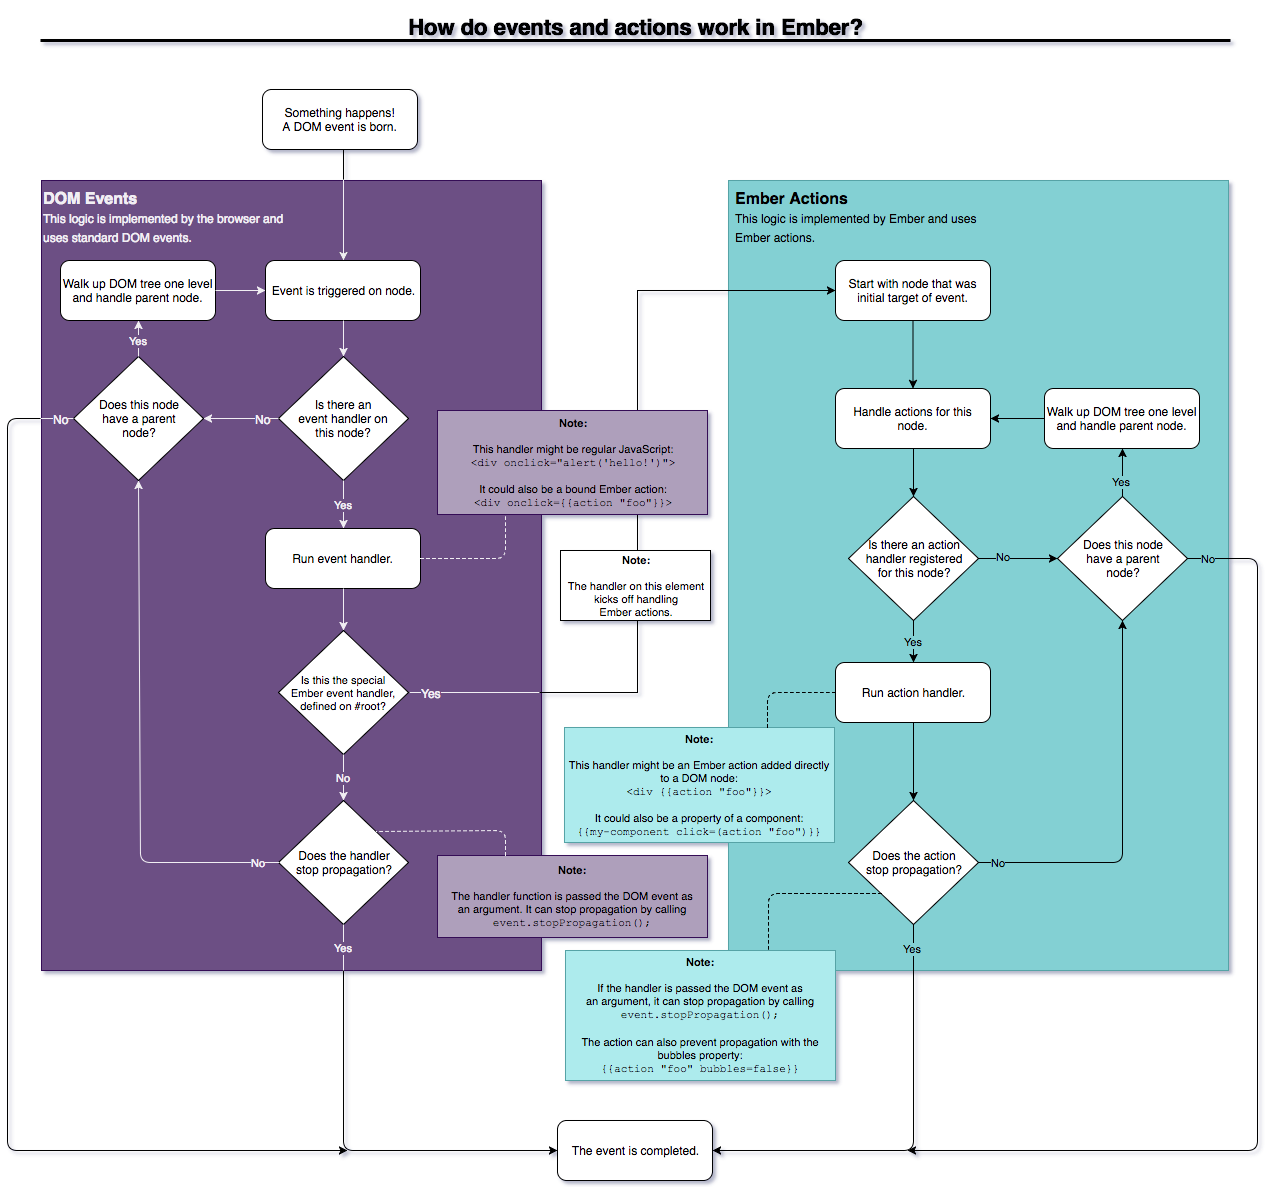 Flowchart titled: “How do events and actions work in Ember?” Link to plaintext outline of chart .